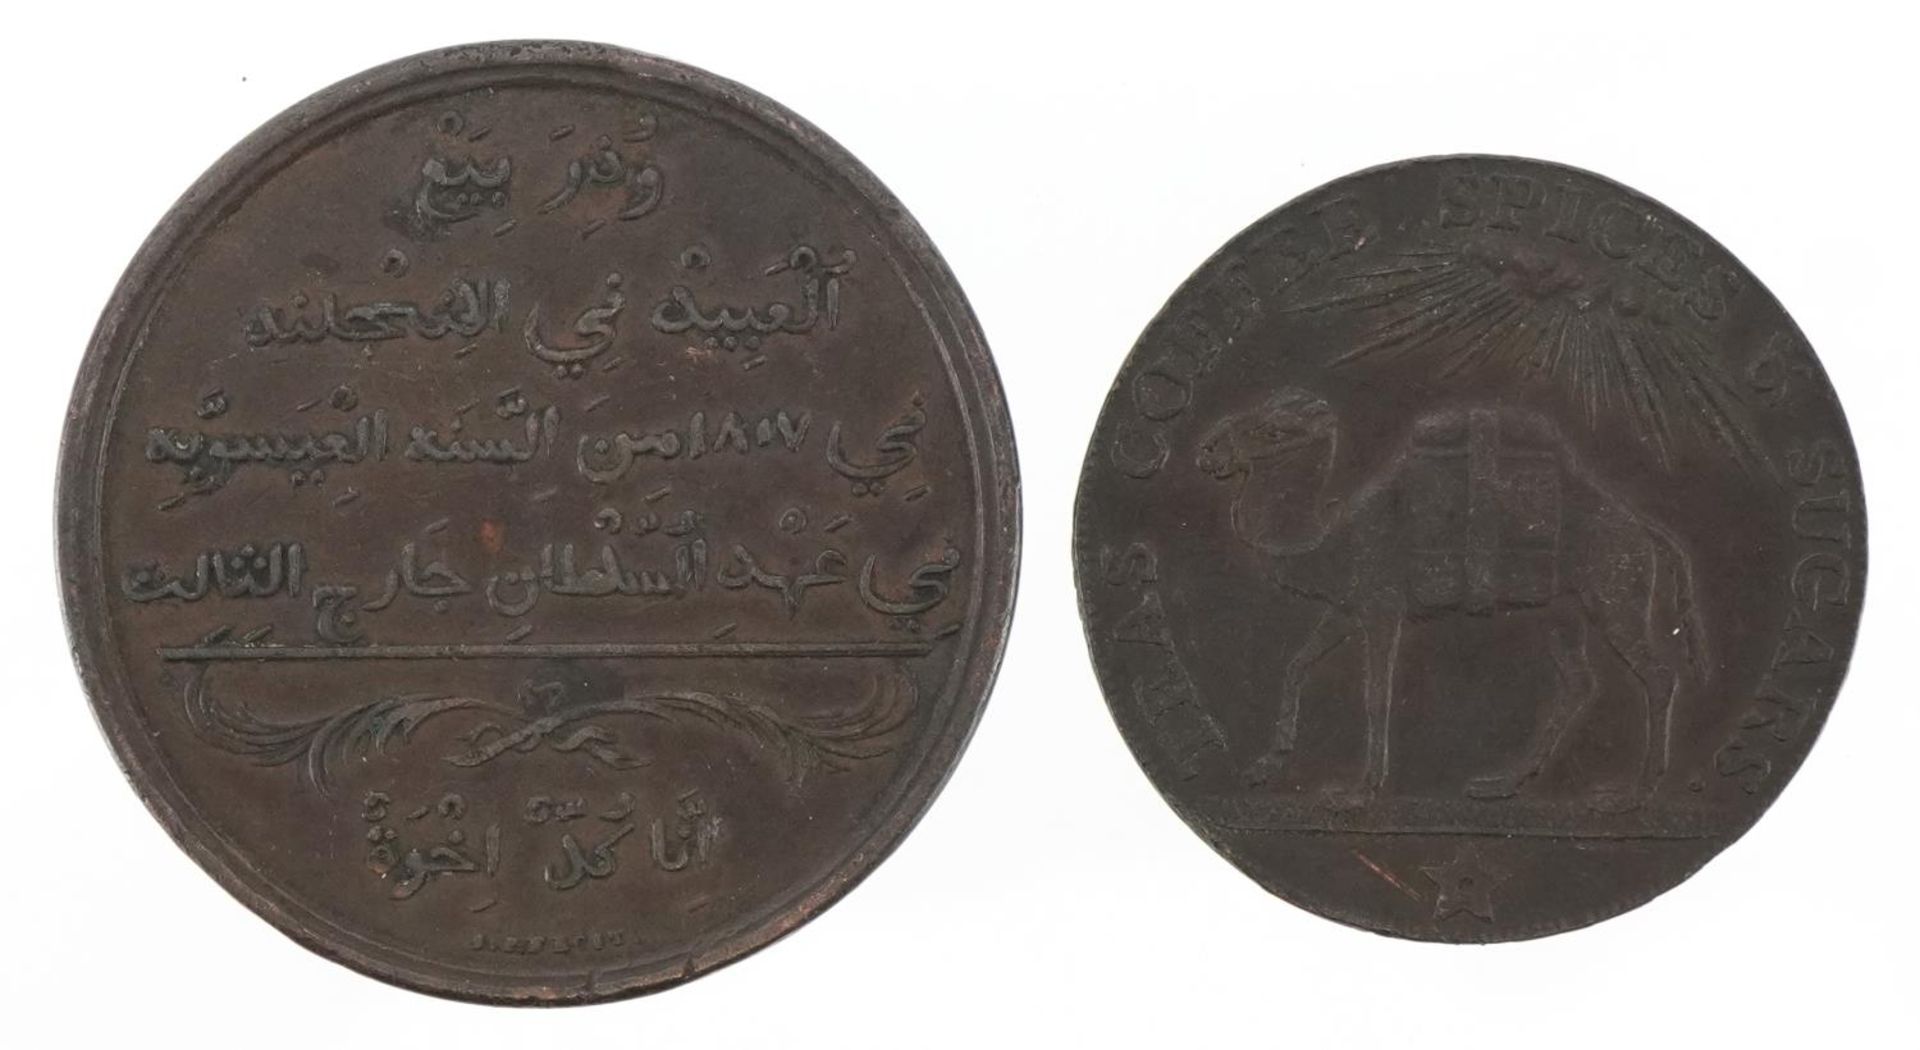 M Lambre & Son, copper trade token for coffee spices and sugars together with a slavery abolition - Bild 2 aus 2